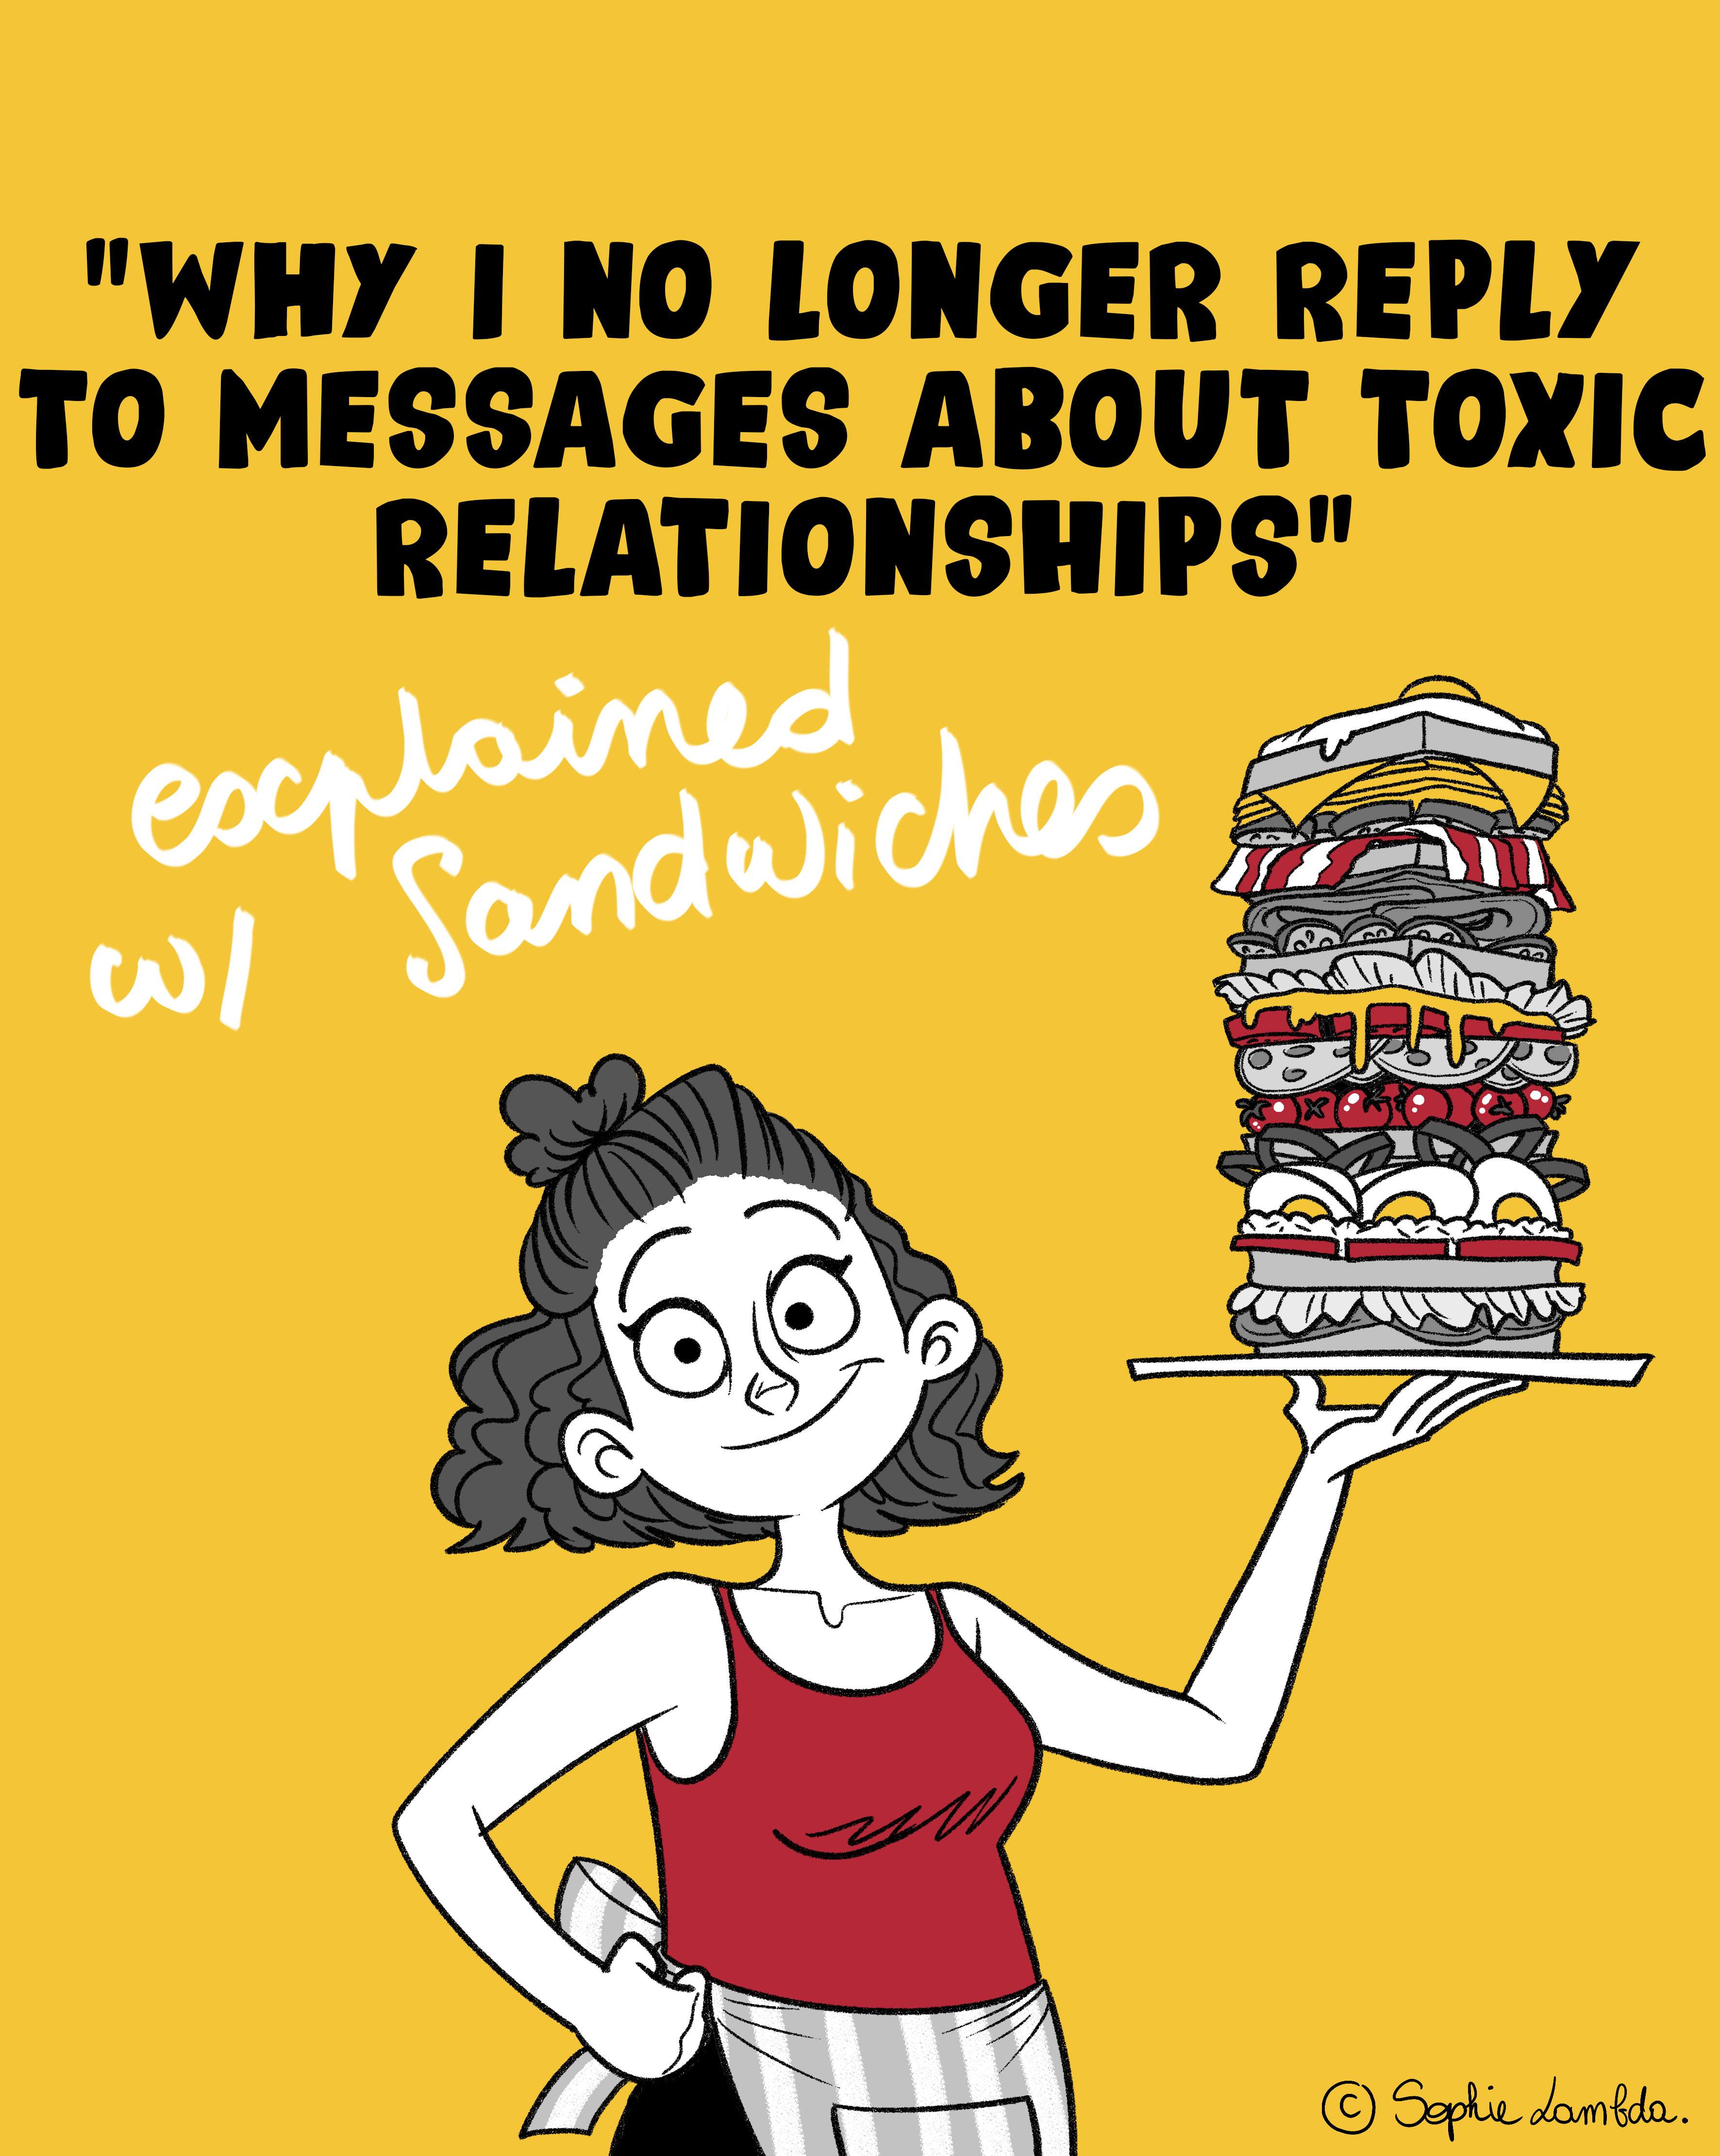 Why I no longer reply to messages about toxic relationships